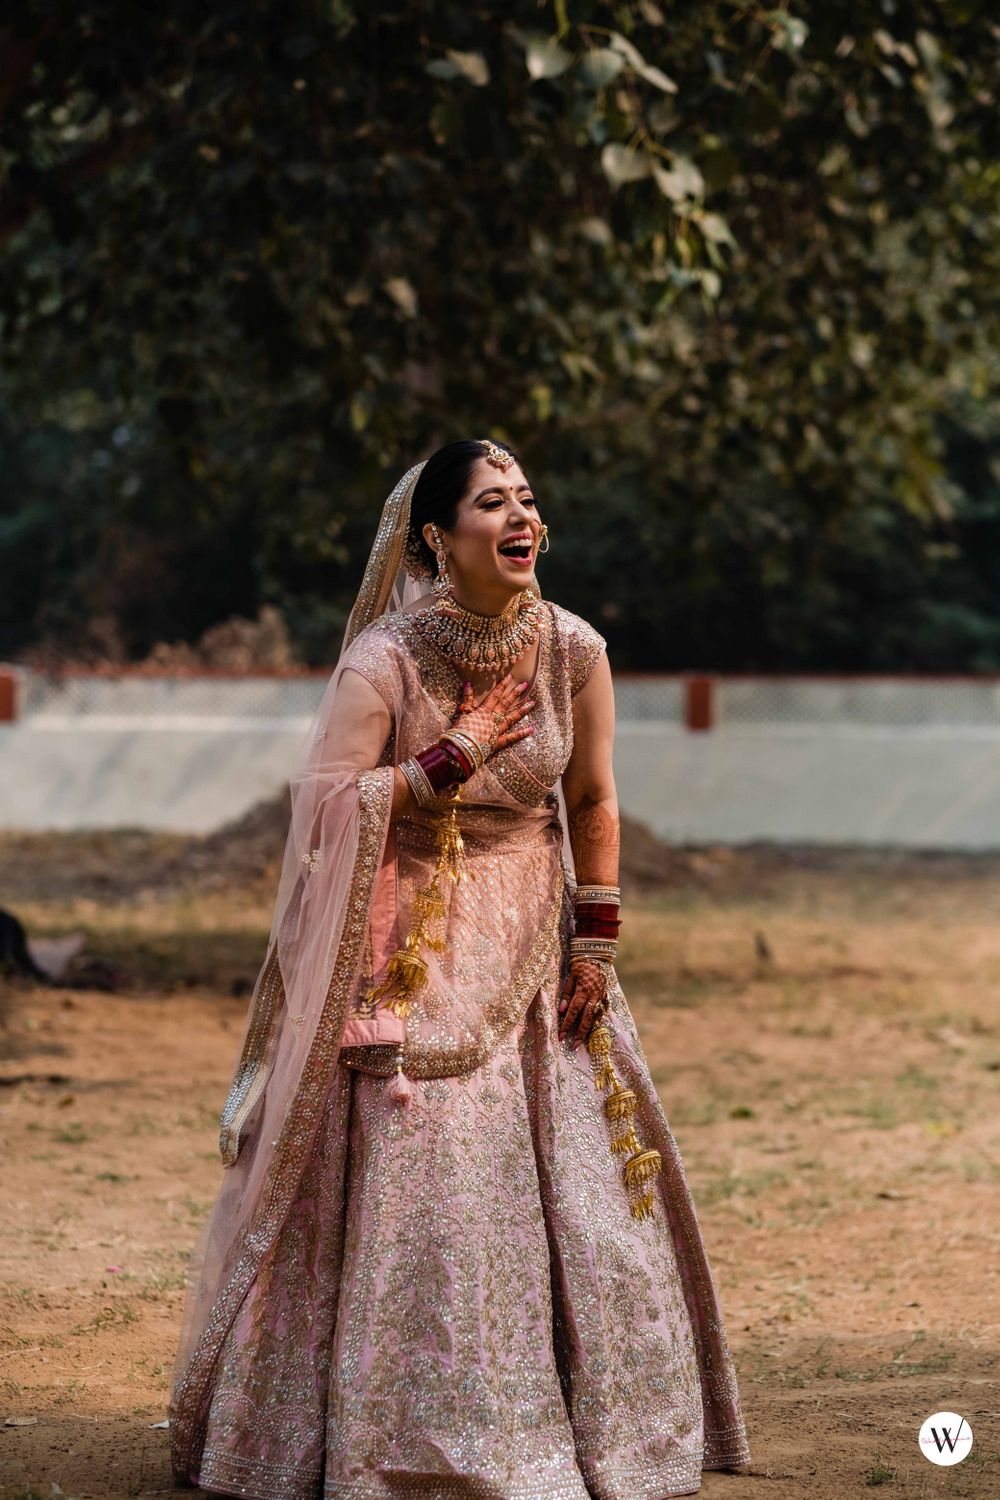 Photo of Candid bridal shot on wedding day with a bride in a pastel lehenga